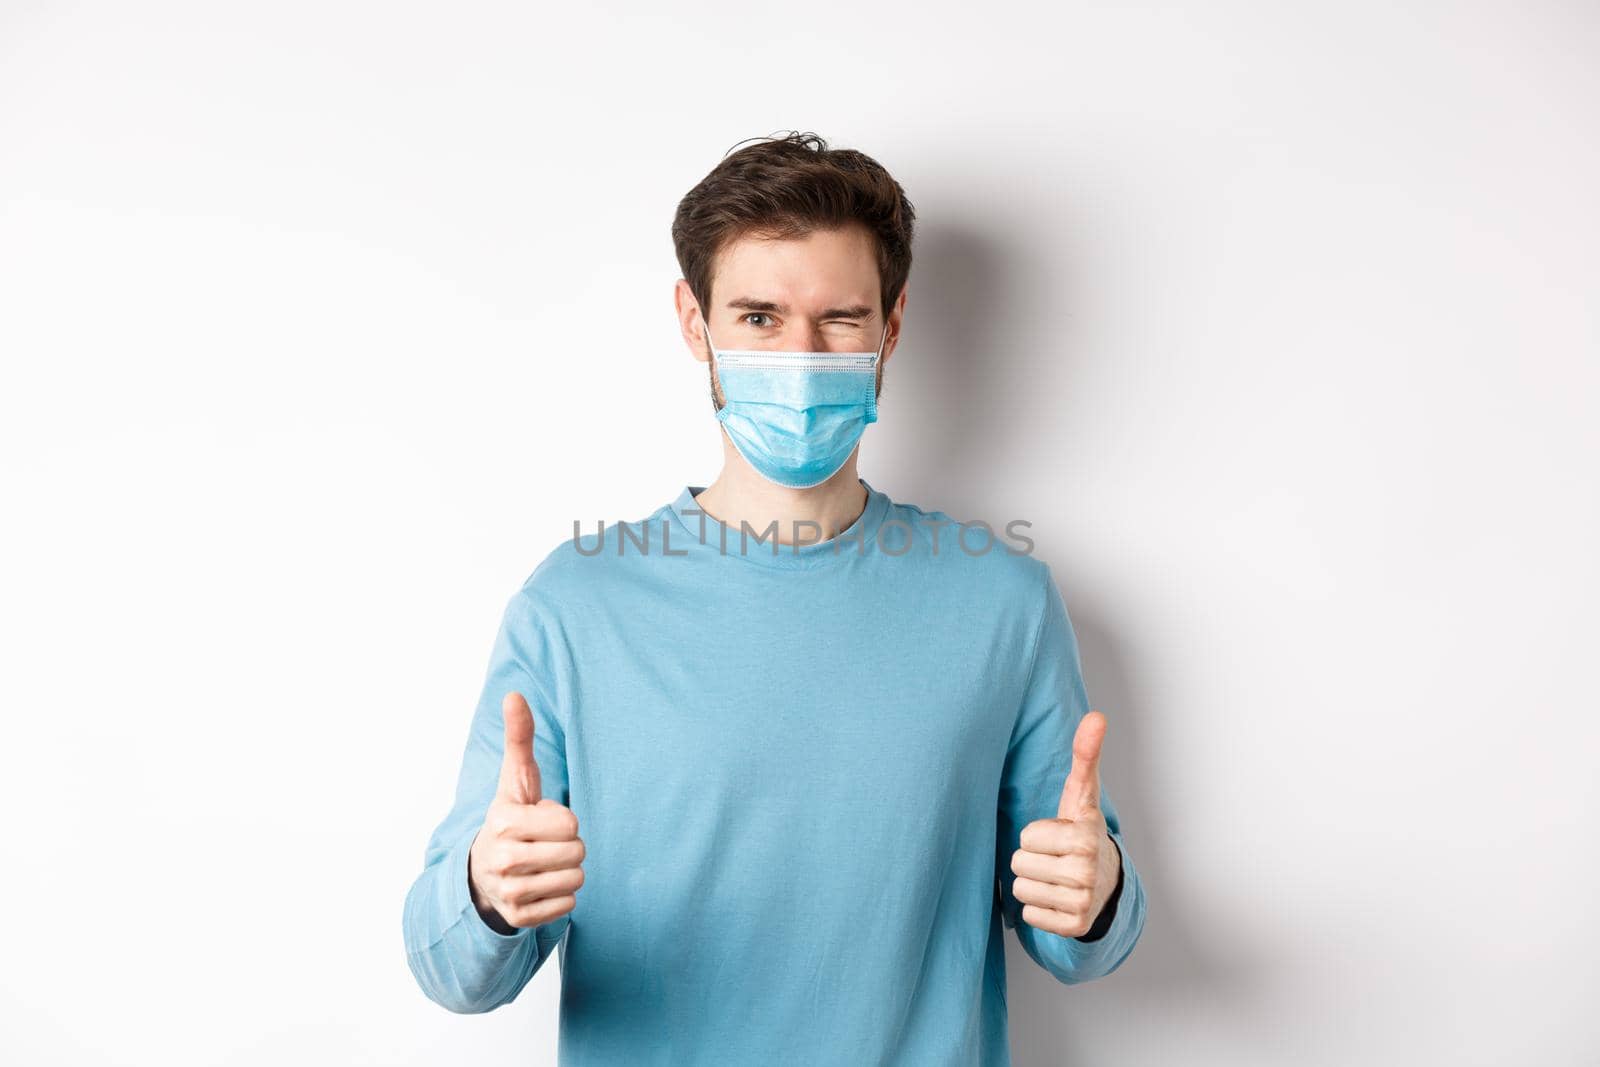 Covid-19, pandemic and social distancing concept. Happy young man in medical mask winking, showing thumbs up in approval, recommending product, white background.